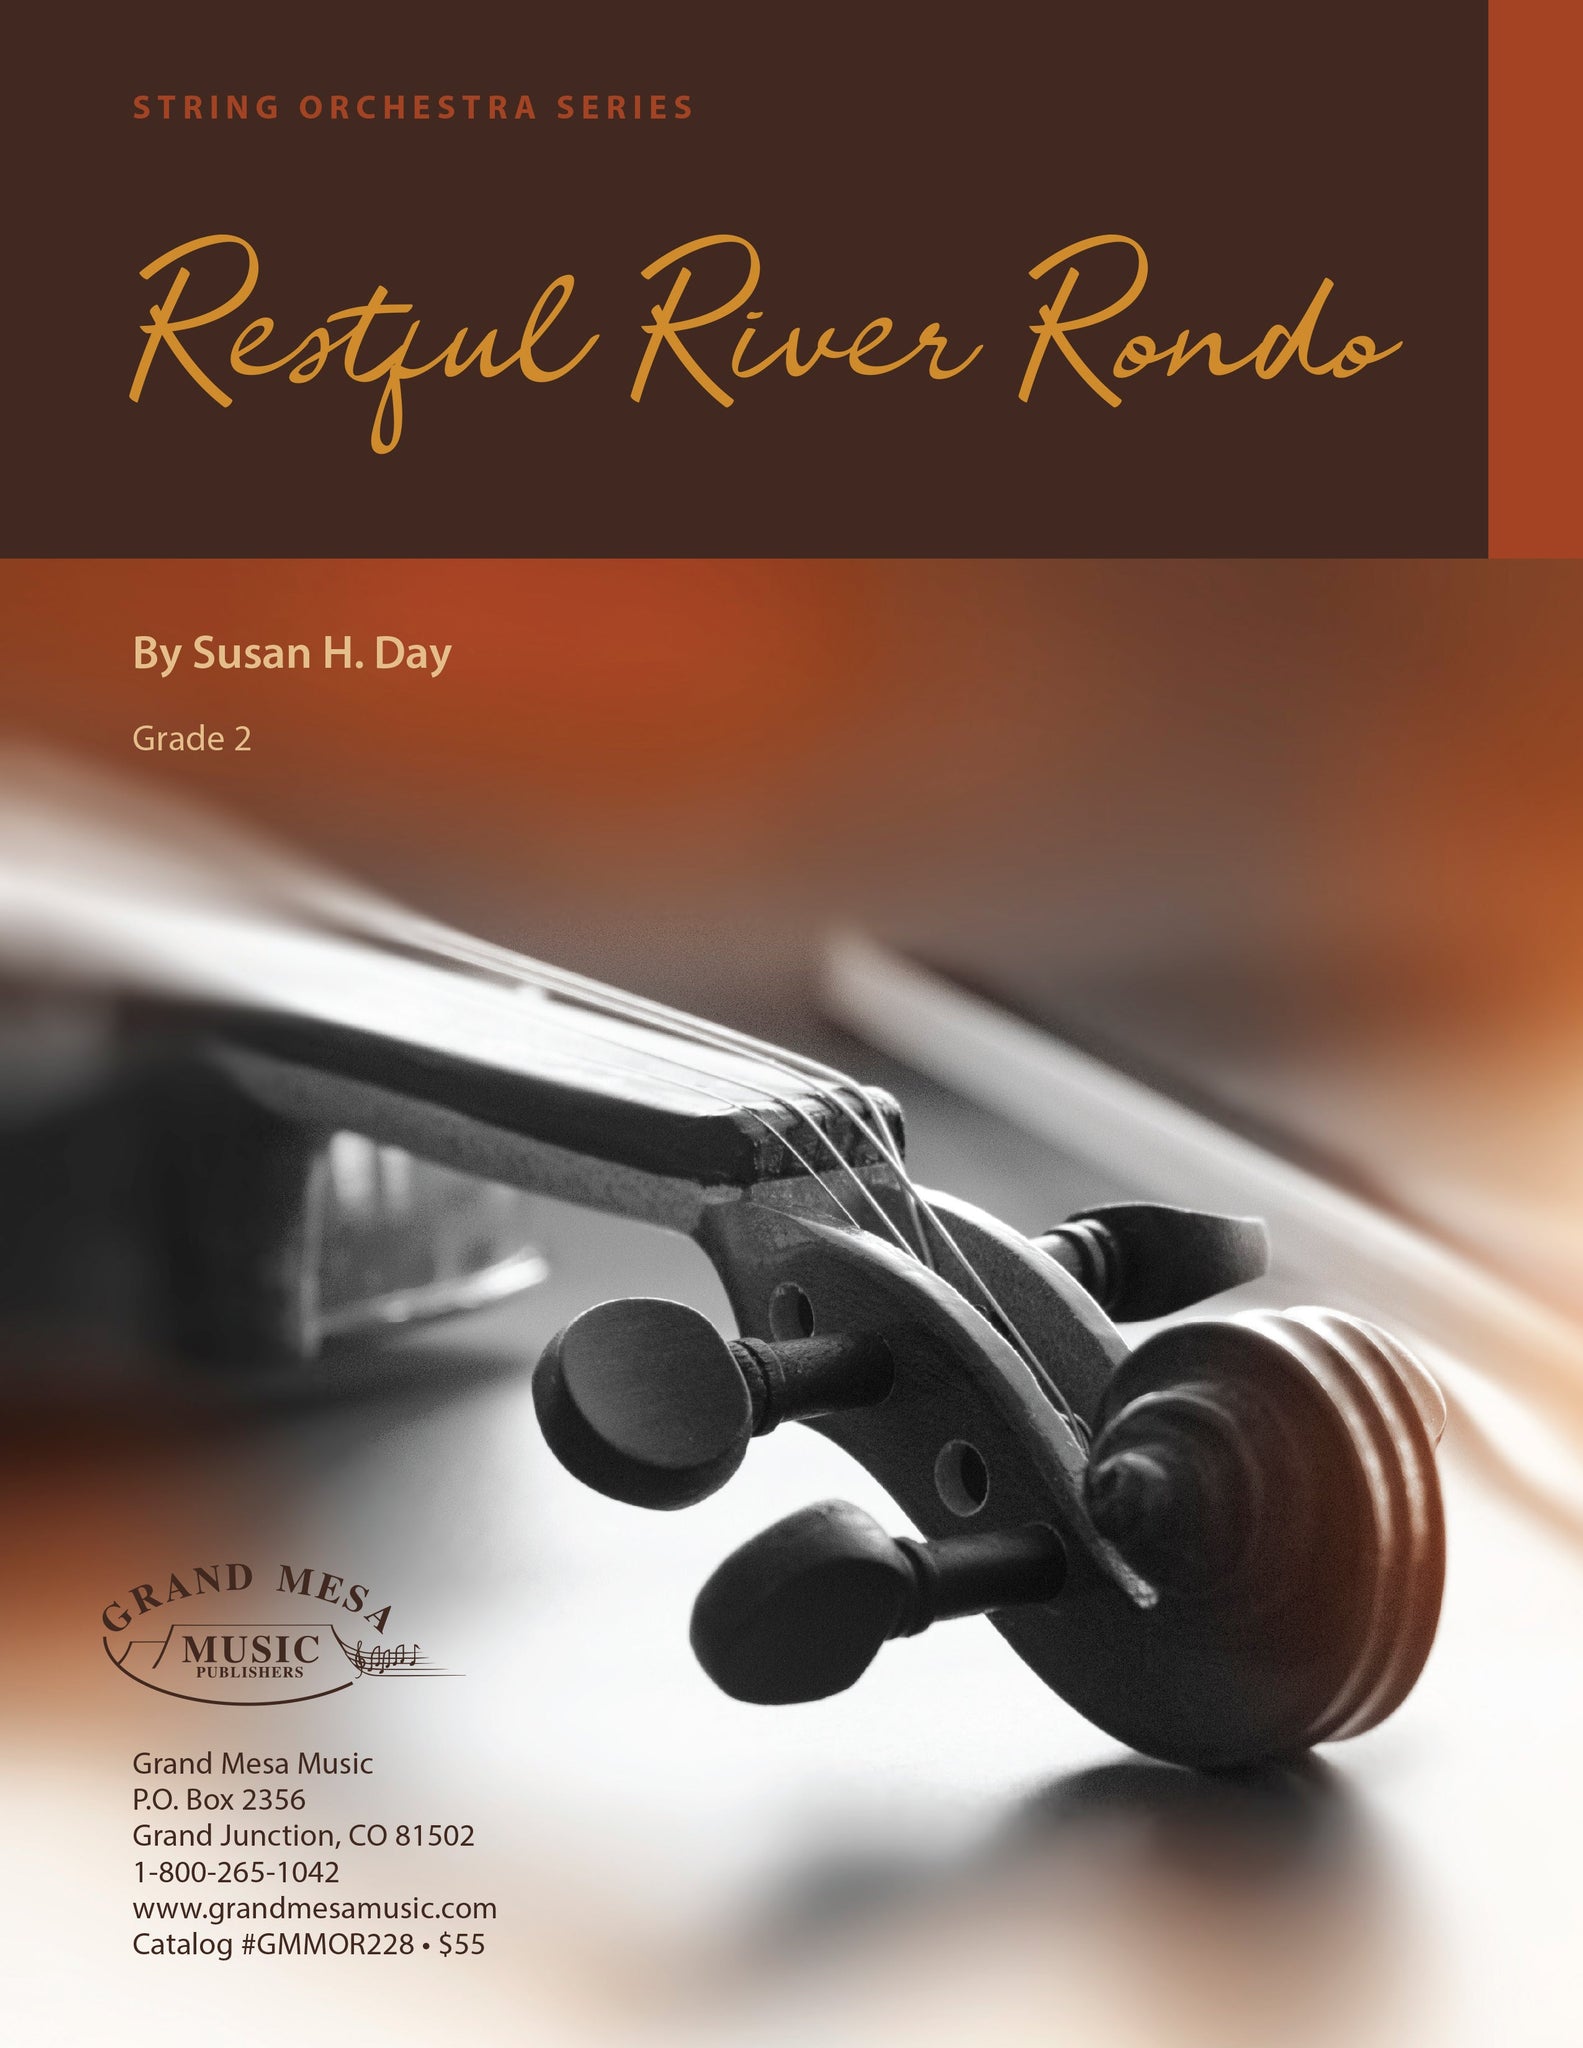 Strings sheet music cover of Restful River Rondo, composed by Susan Day.